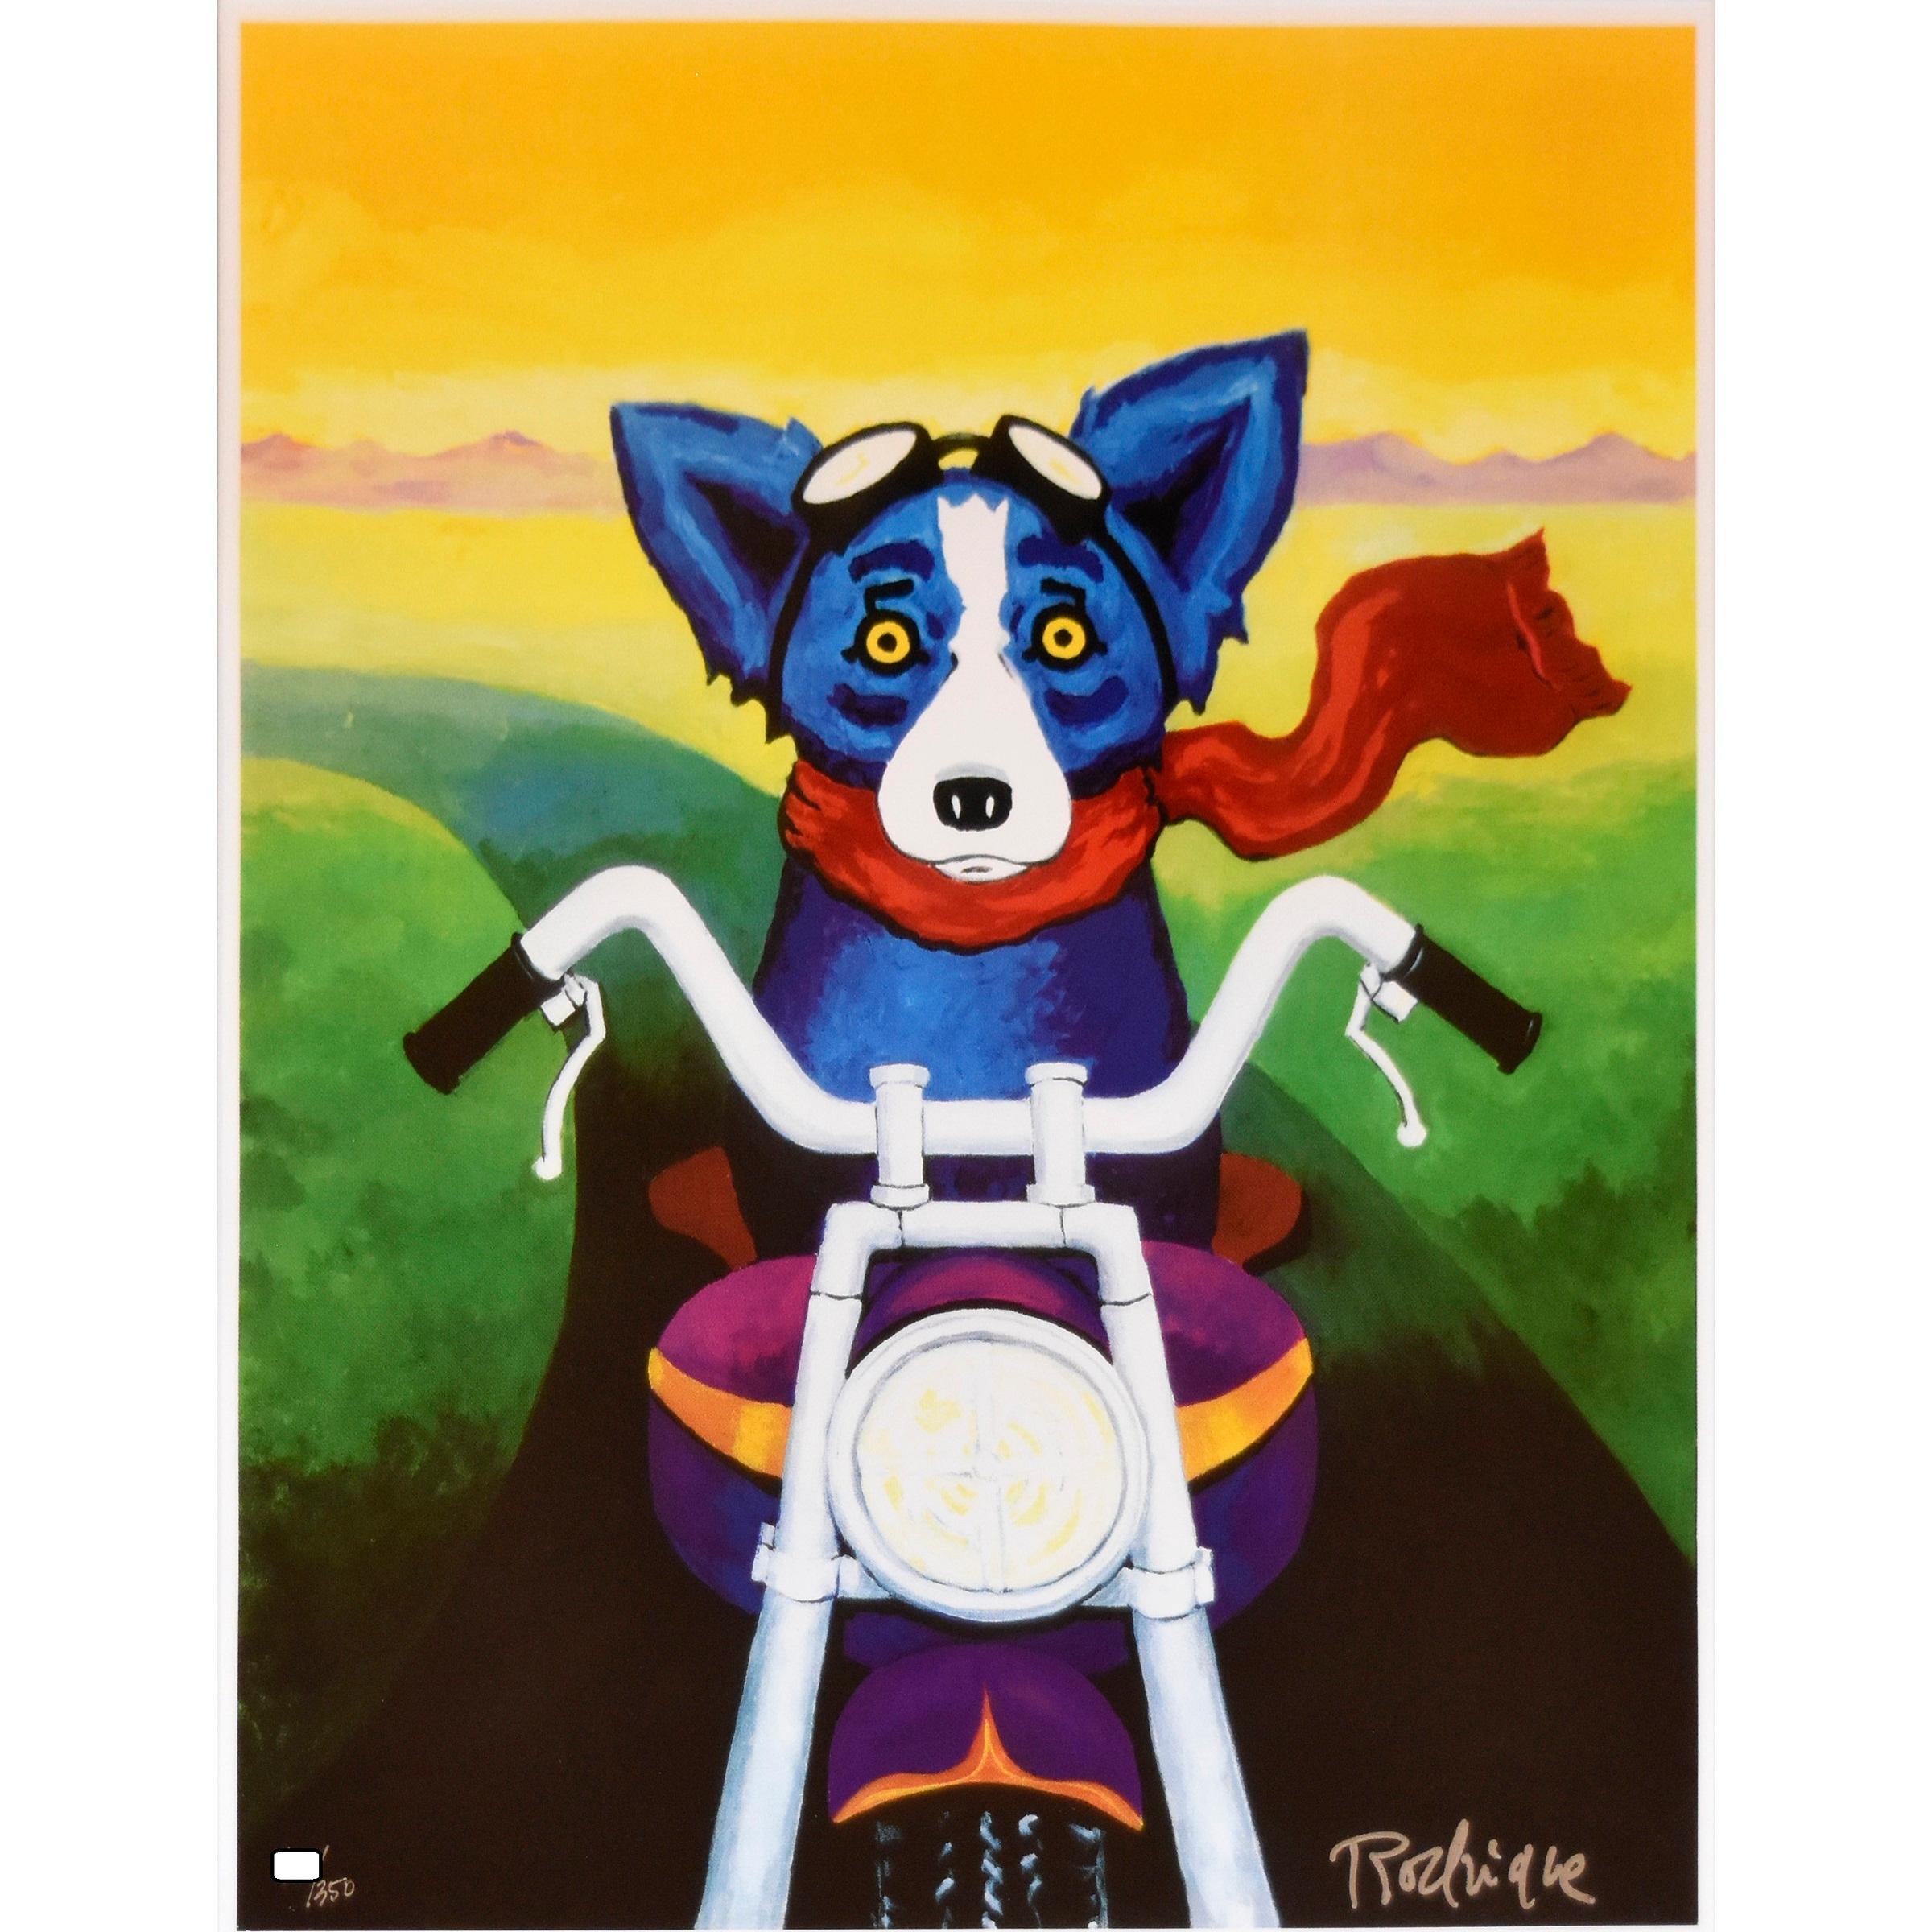 George Rodrigue Animal Print - A Faster Breed - Blue Dog Signed Silkscreen Print